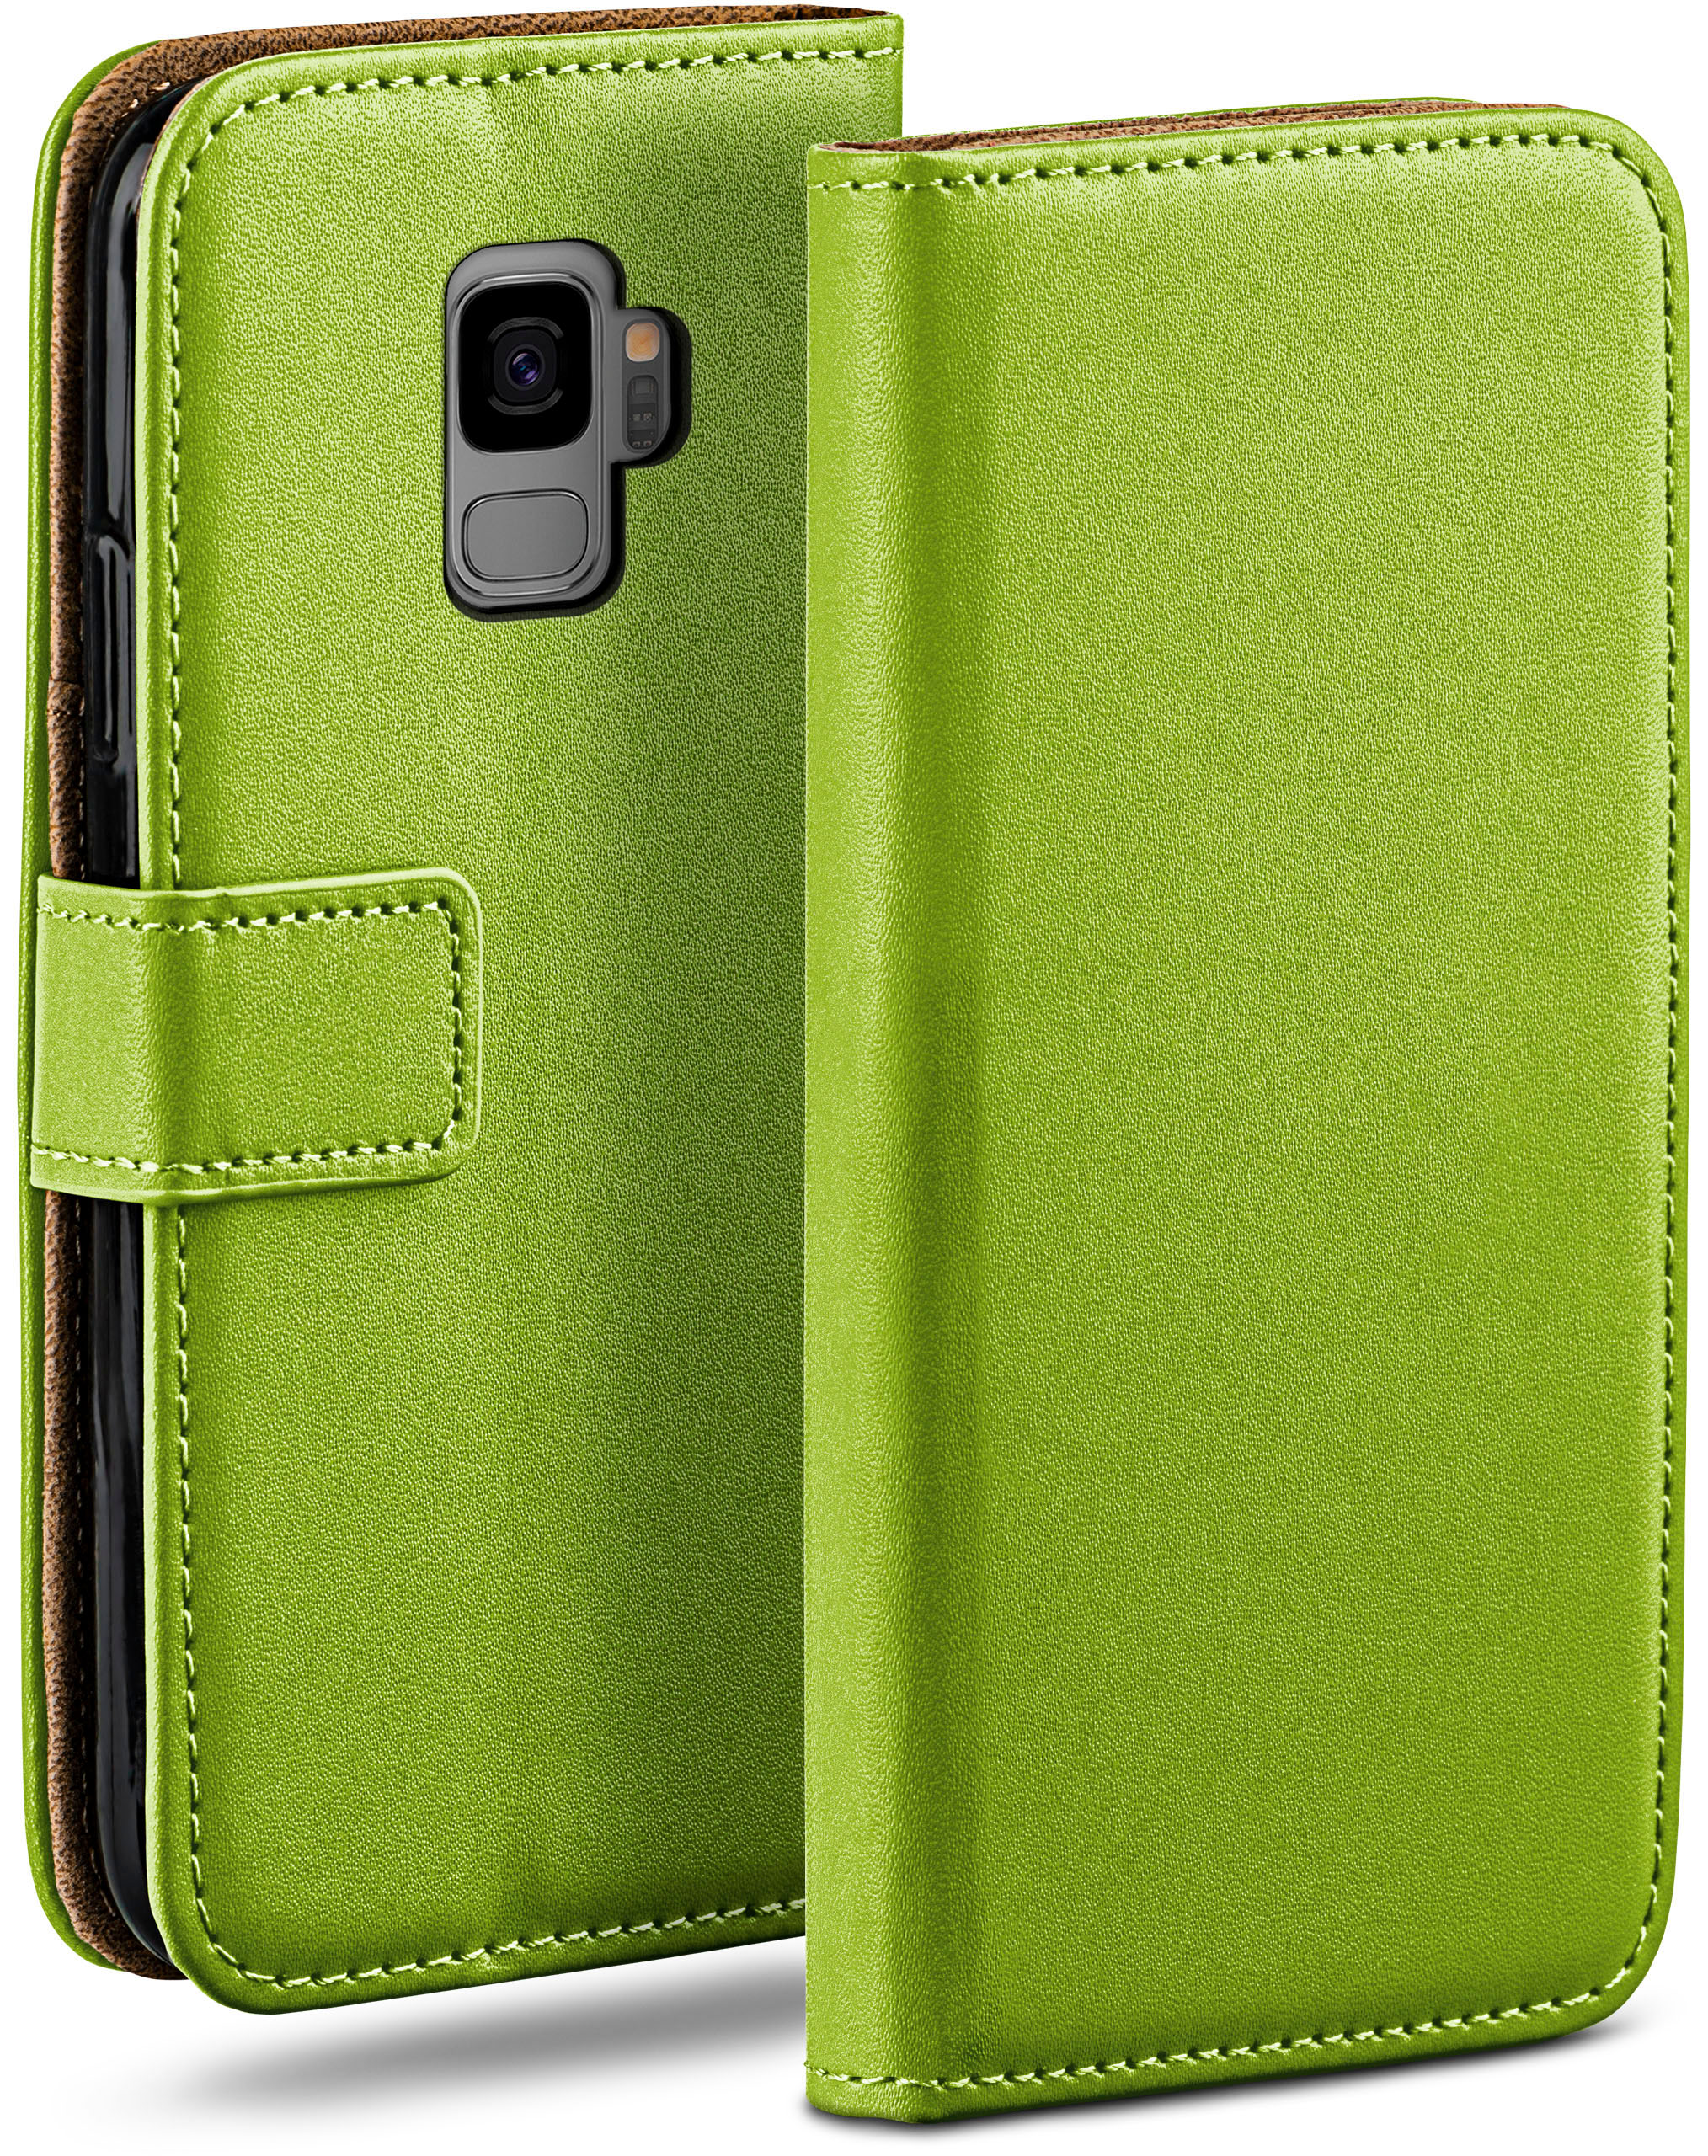 Book Bookcover, Galaxy S9, Case, Samsung, Lime-Green MOEX